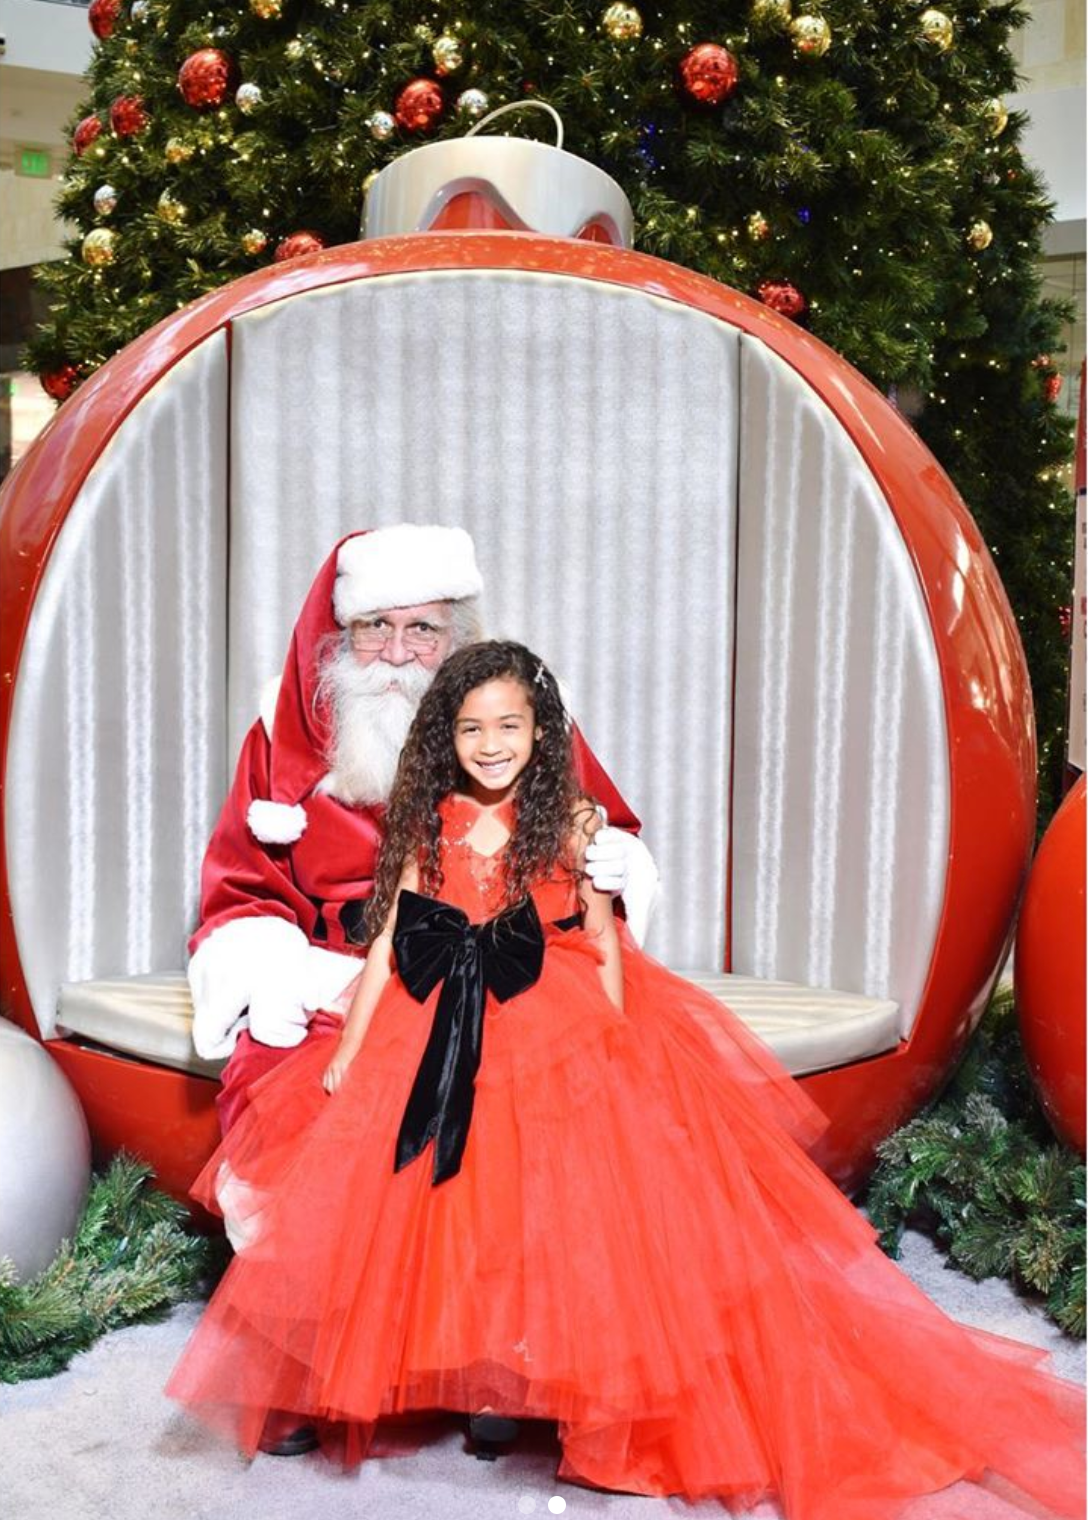 Get In The Holiday Spirit With These Celebrity Christmas Photos